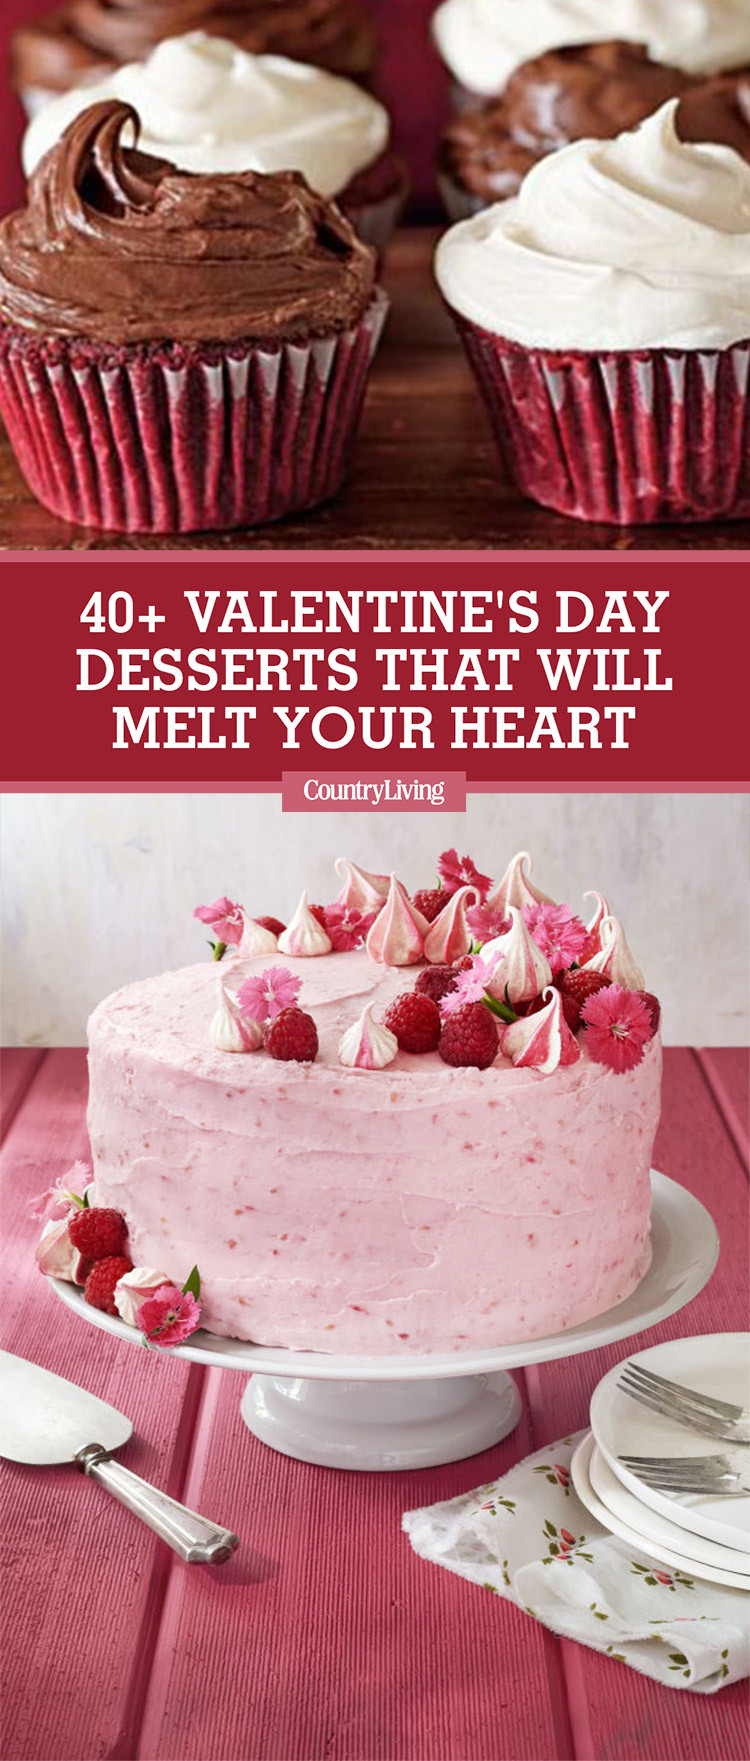 Recipes For Valentine'S Day Desserts
 42 Easy Valentine’s Day Desserts Best Recipes for